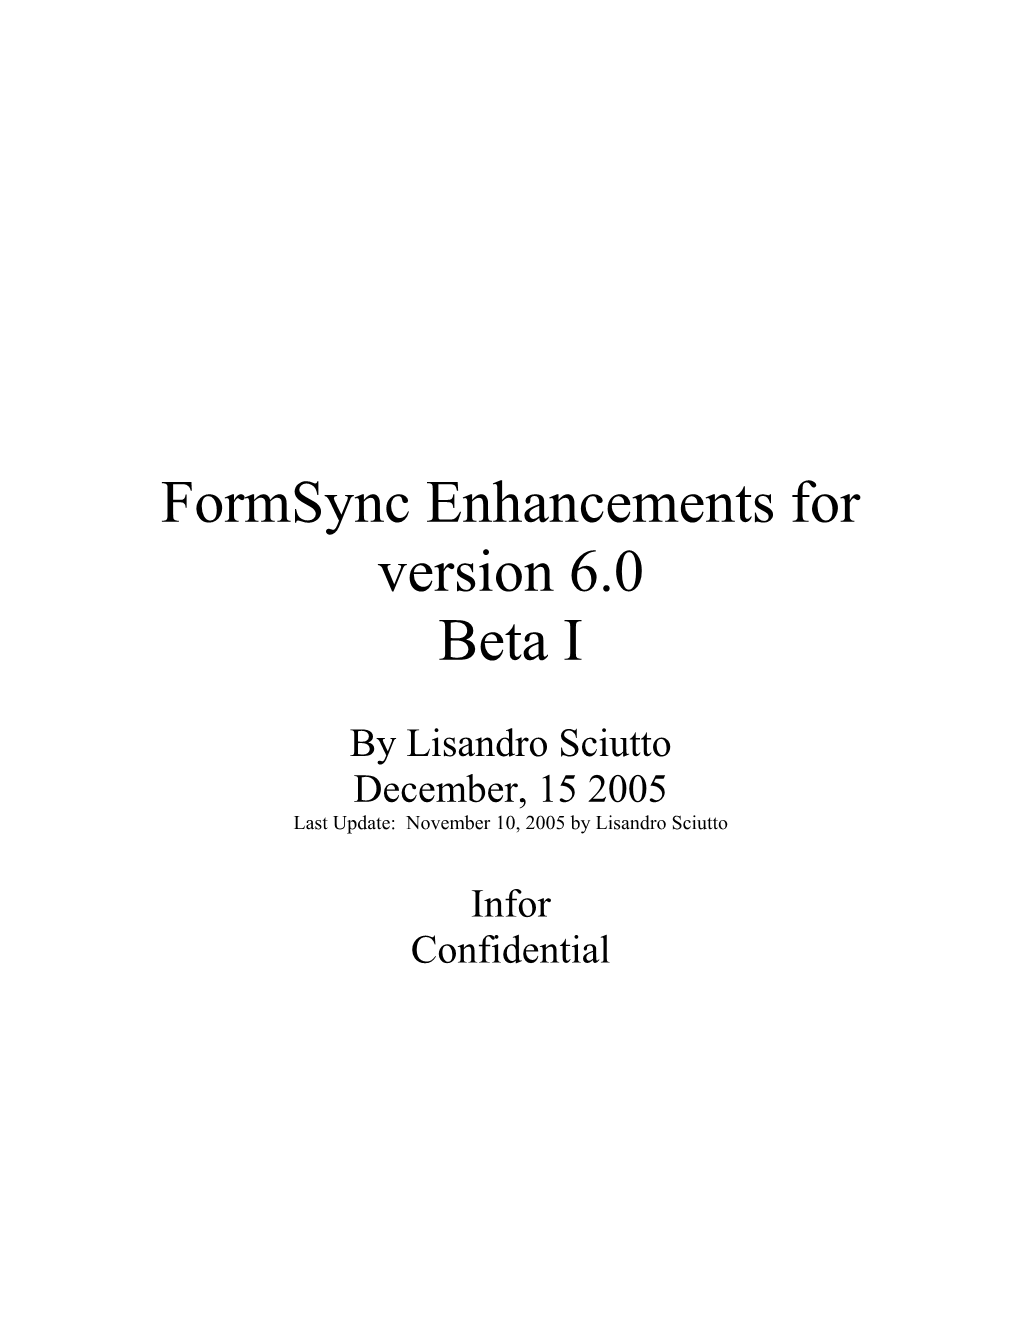 Formsync Enhancements for Version 6.0